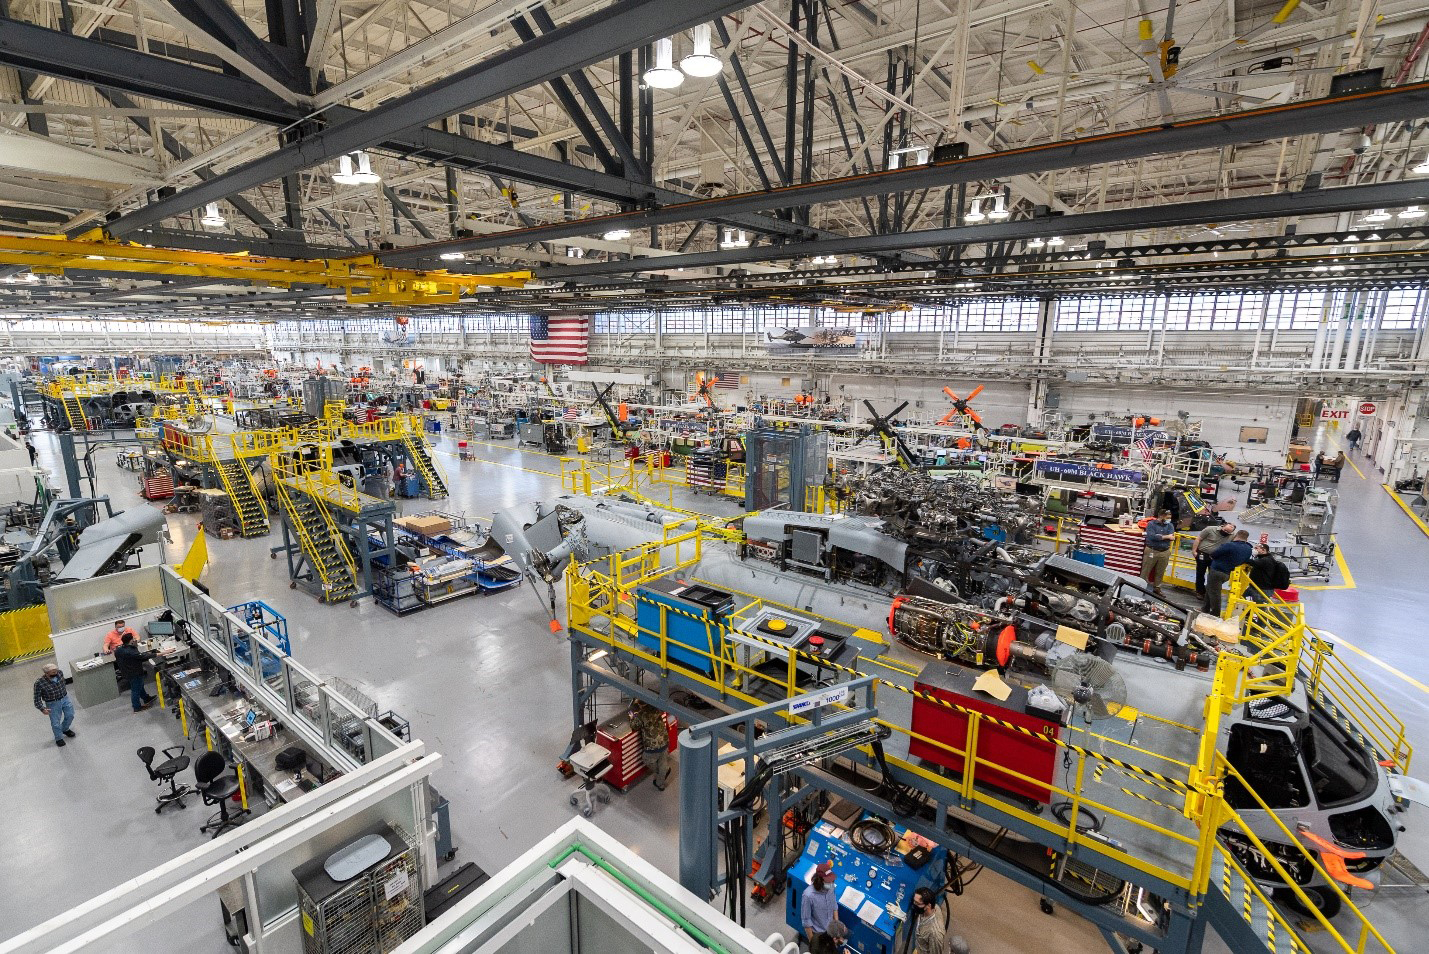 Stratford, Conn: The CH-53K helicopters will be built at Sikorsky headquarters in Stratford, Connecticut, leveraging the company’s digital build and advanced technology production processes.